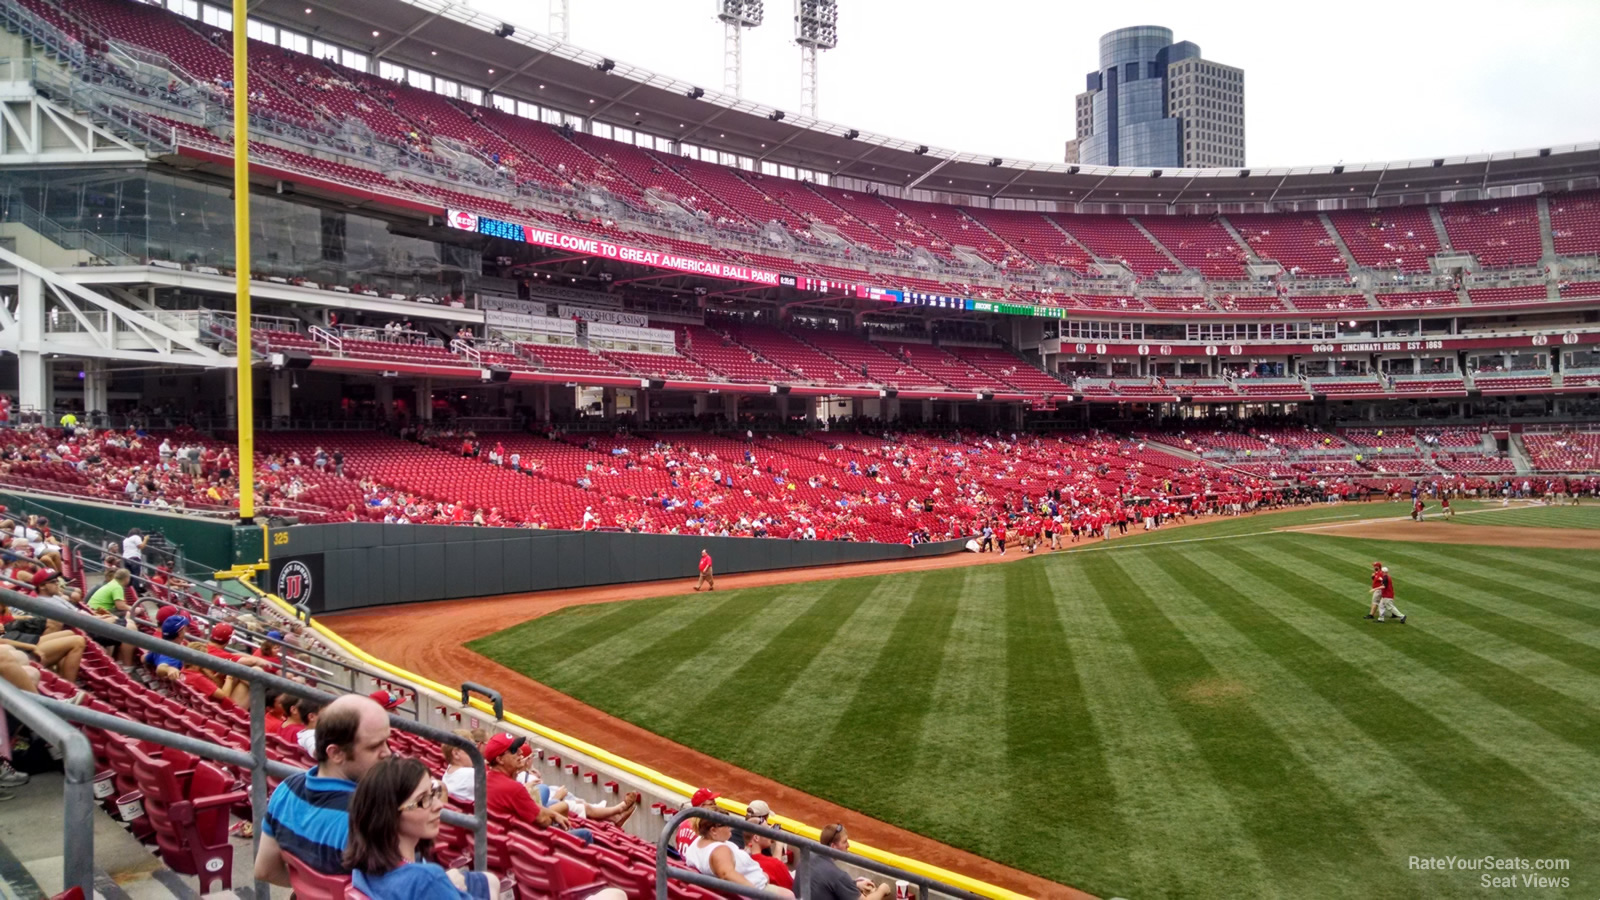 Section 143 at Great American Ball Park 